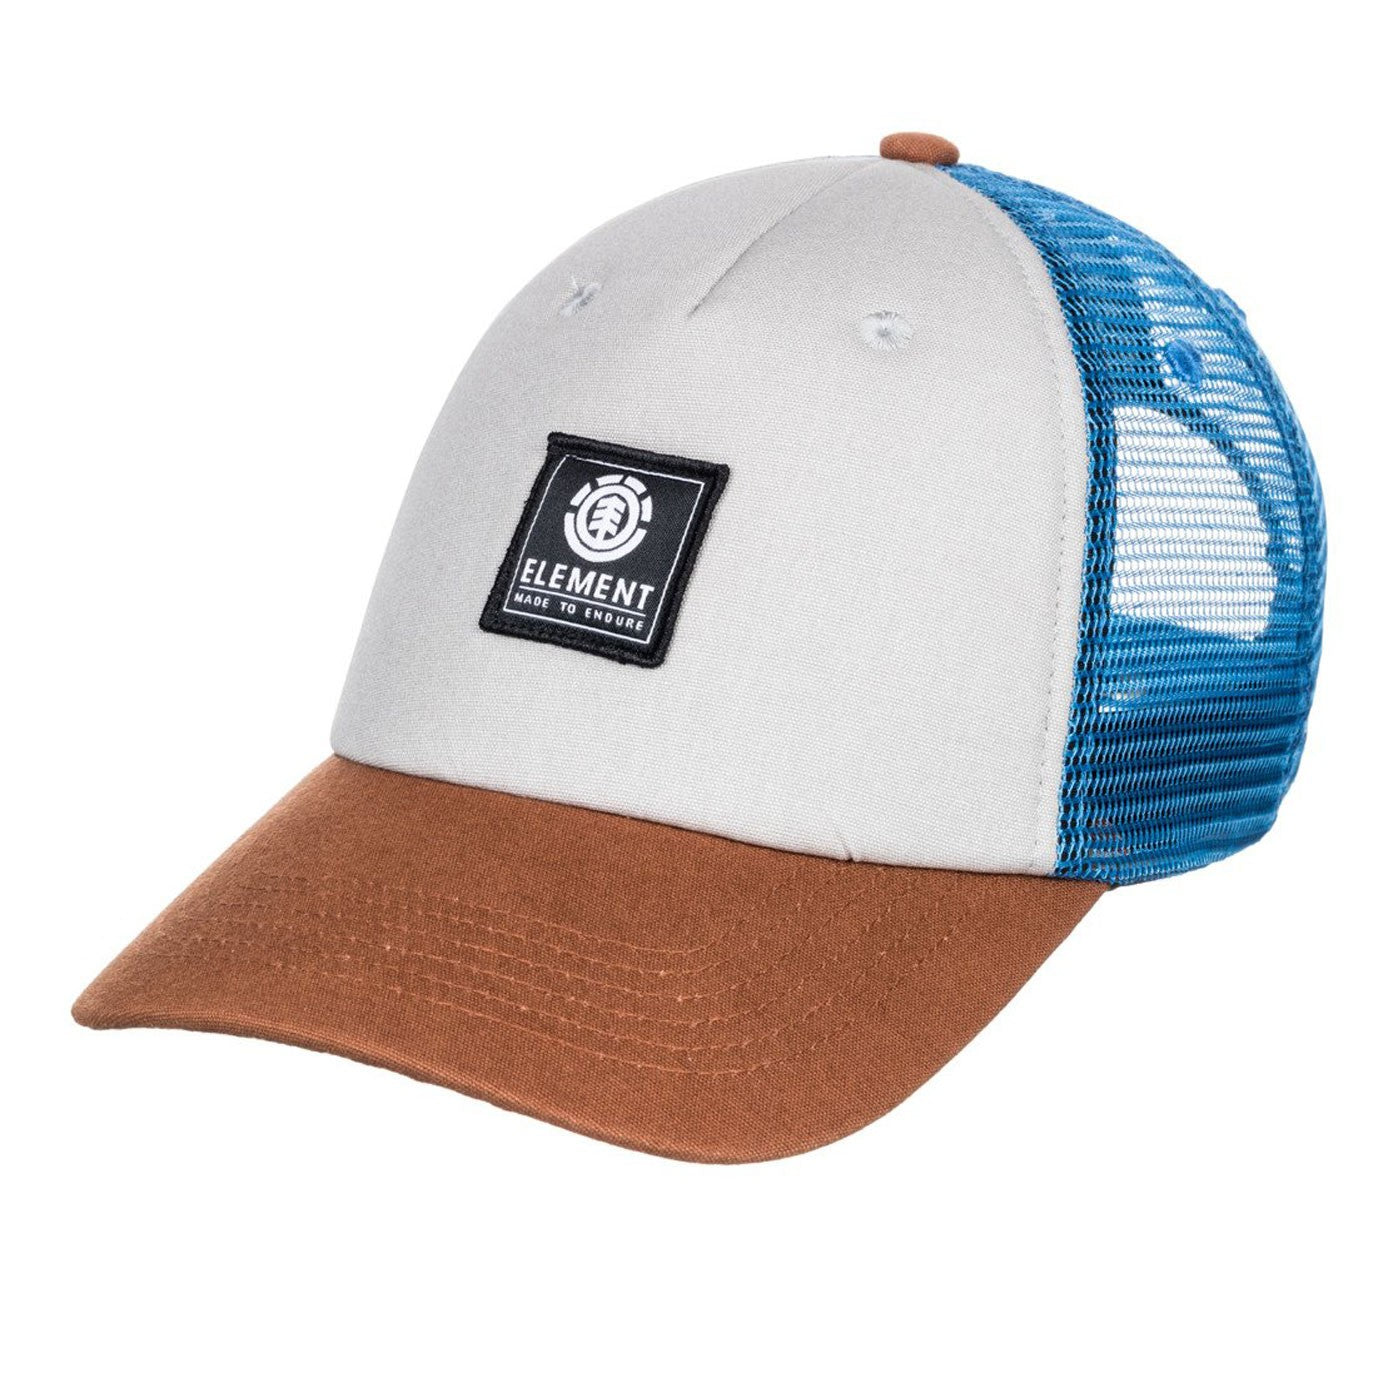 CASQUETTE ELEMENT ICON MESH CAP PUSSYWILLOW GRY